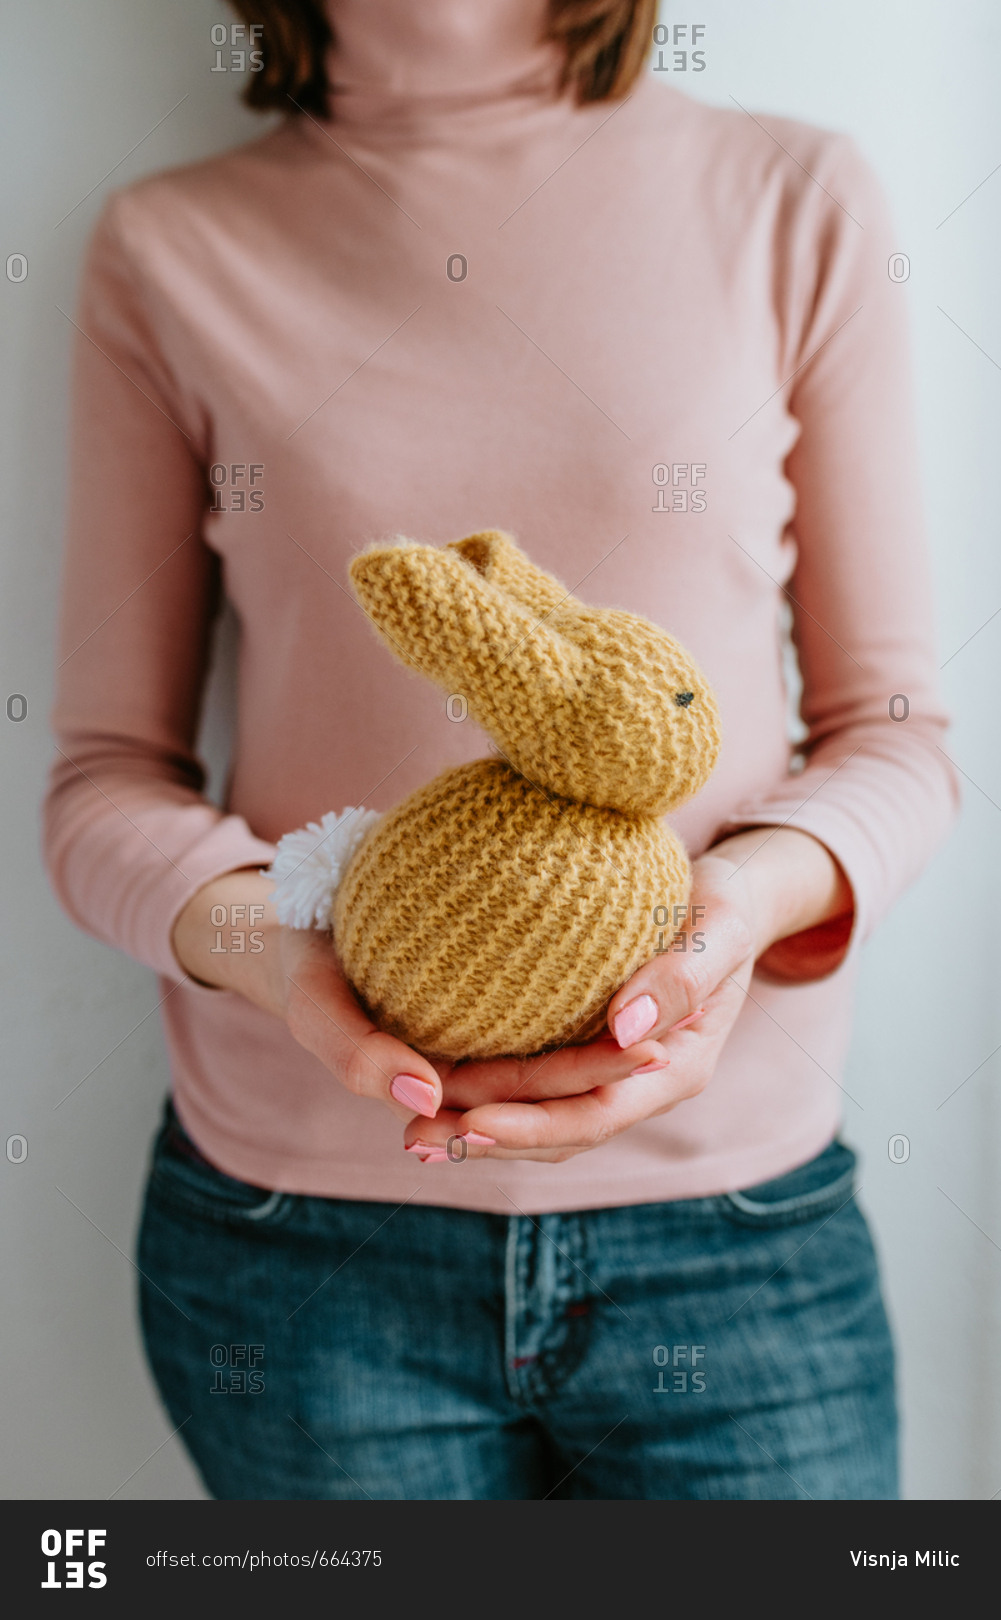 Person wearing pink shirt holding cute knitted Easter bunny